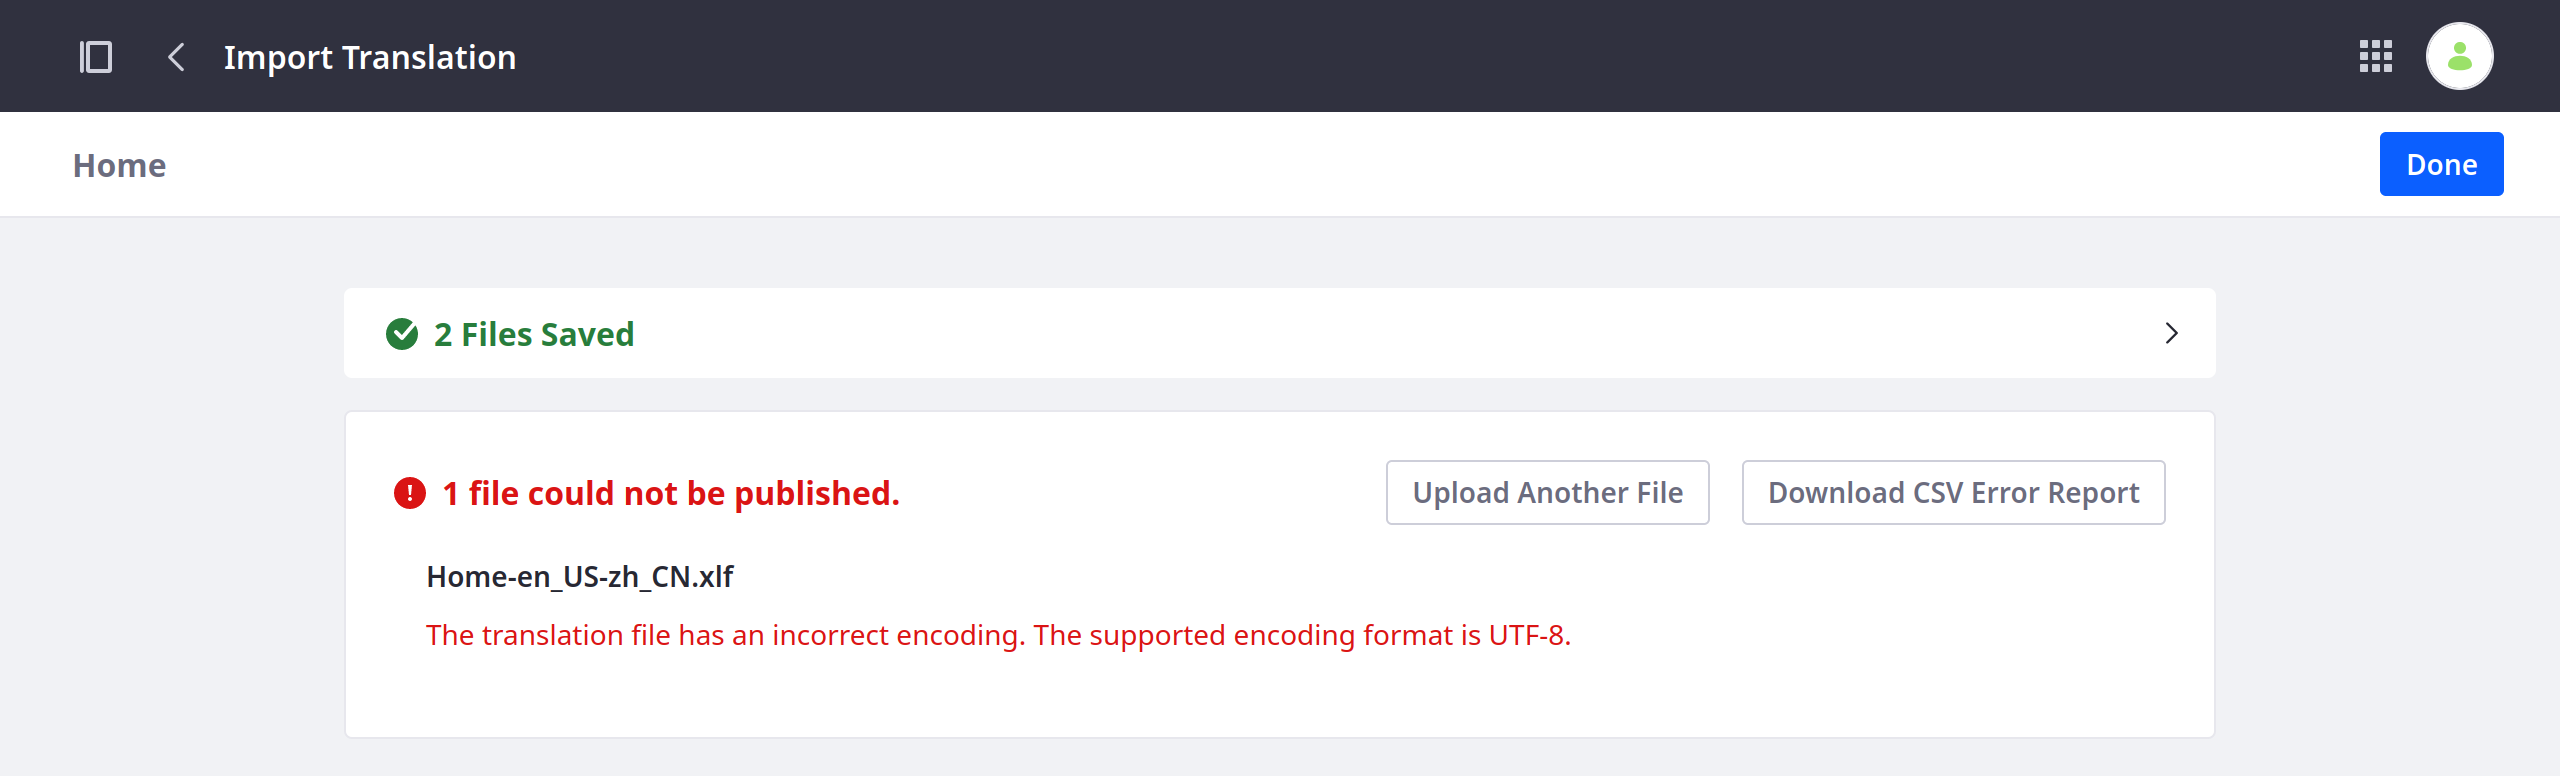 If errors occur during import, Liferay notifies you of the failing files and provides a downloadable CSV error report.